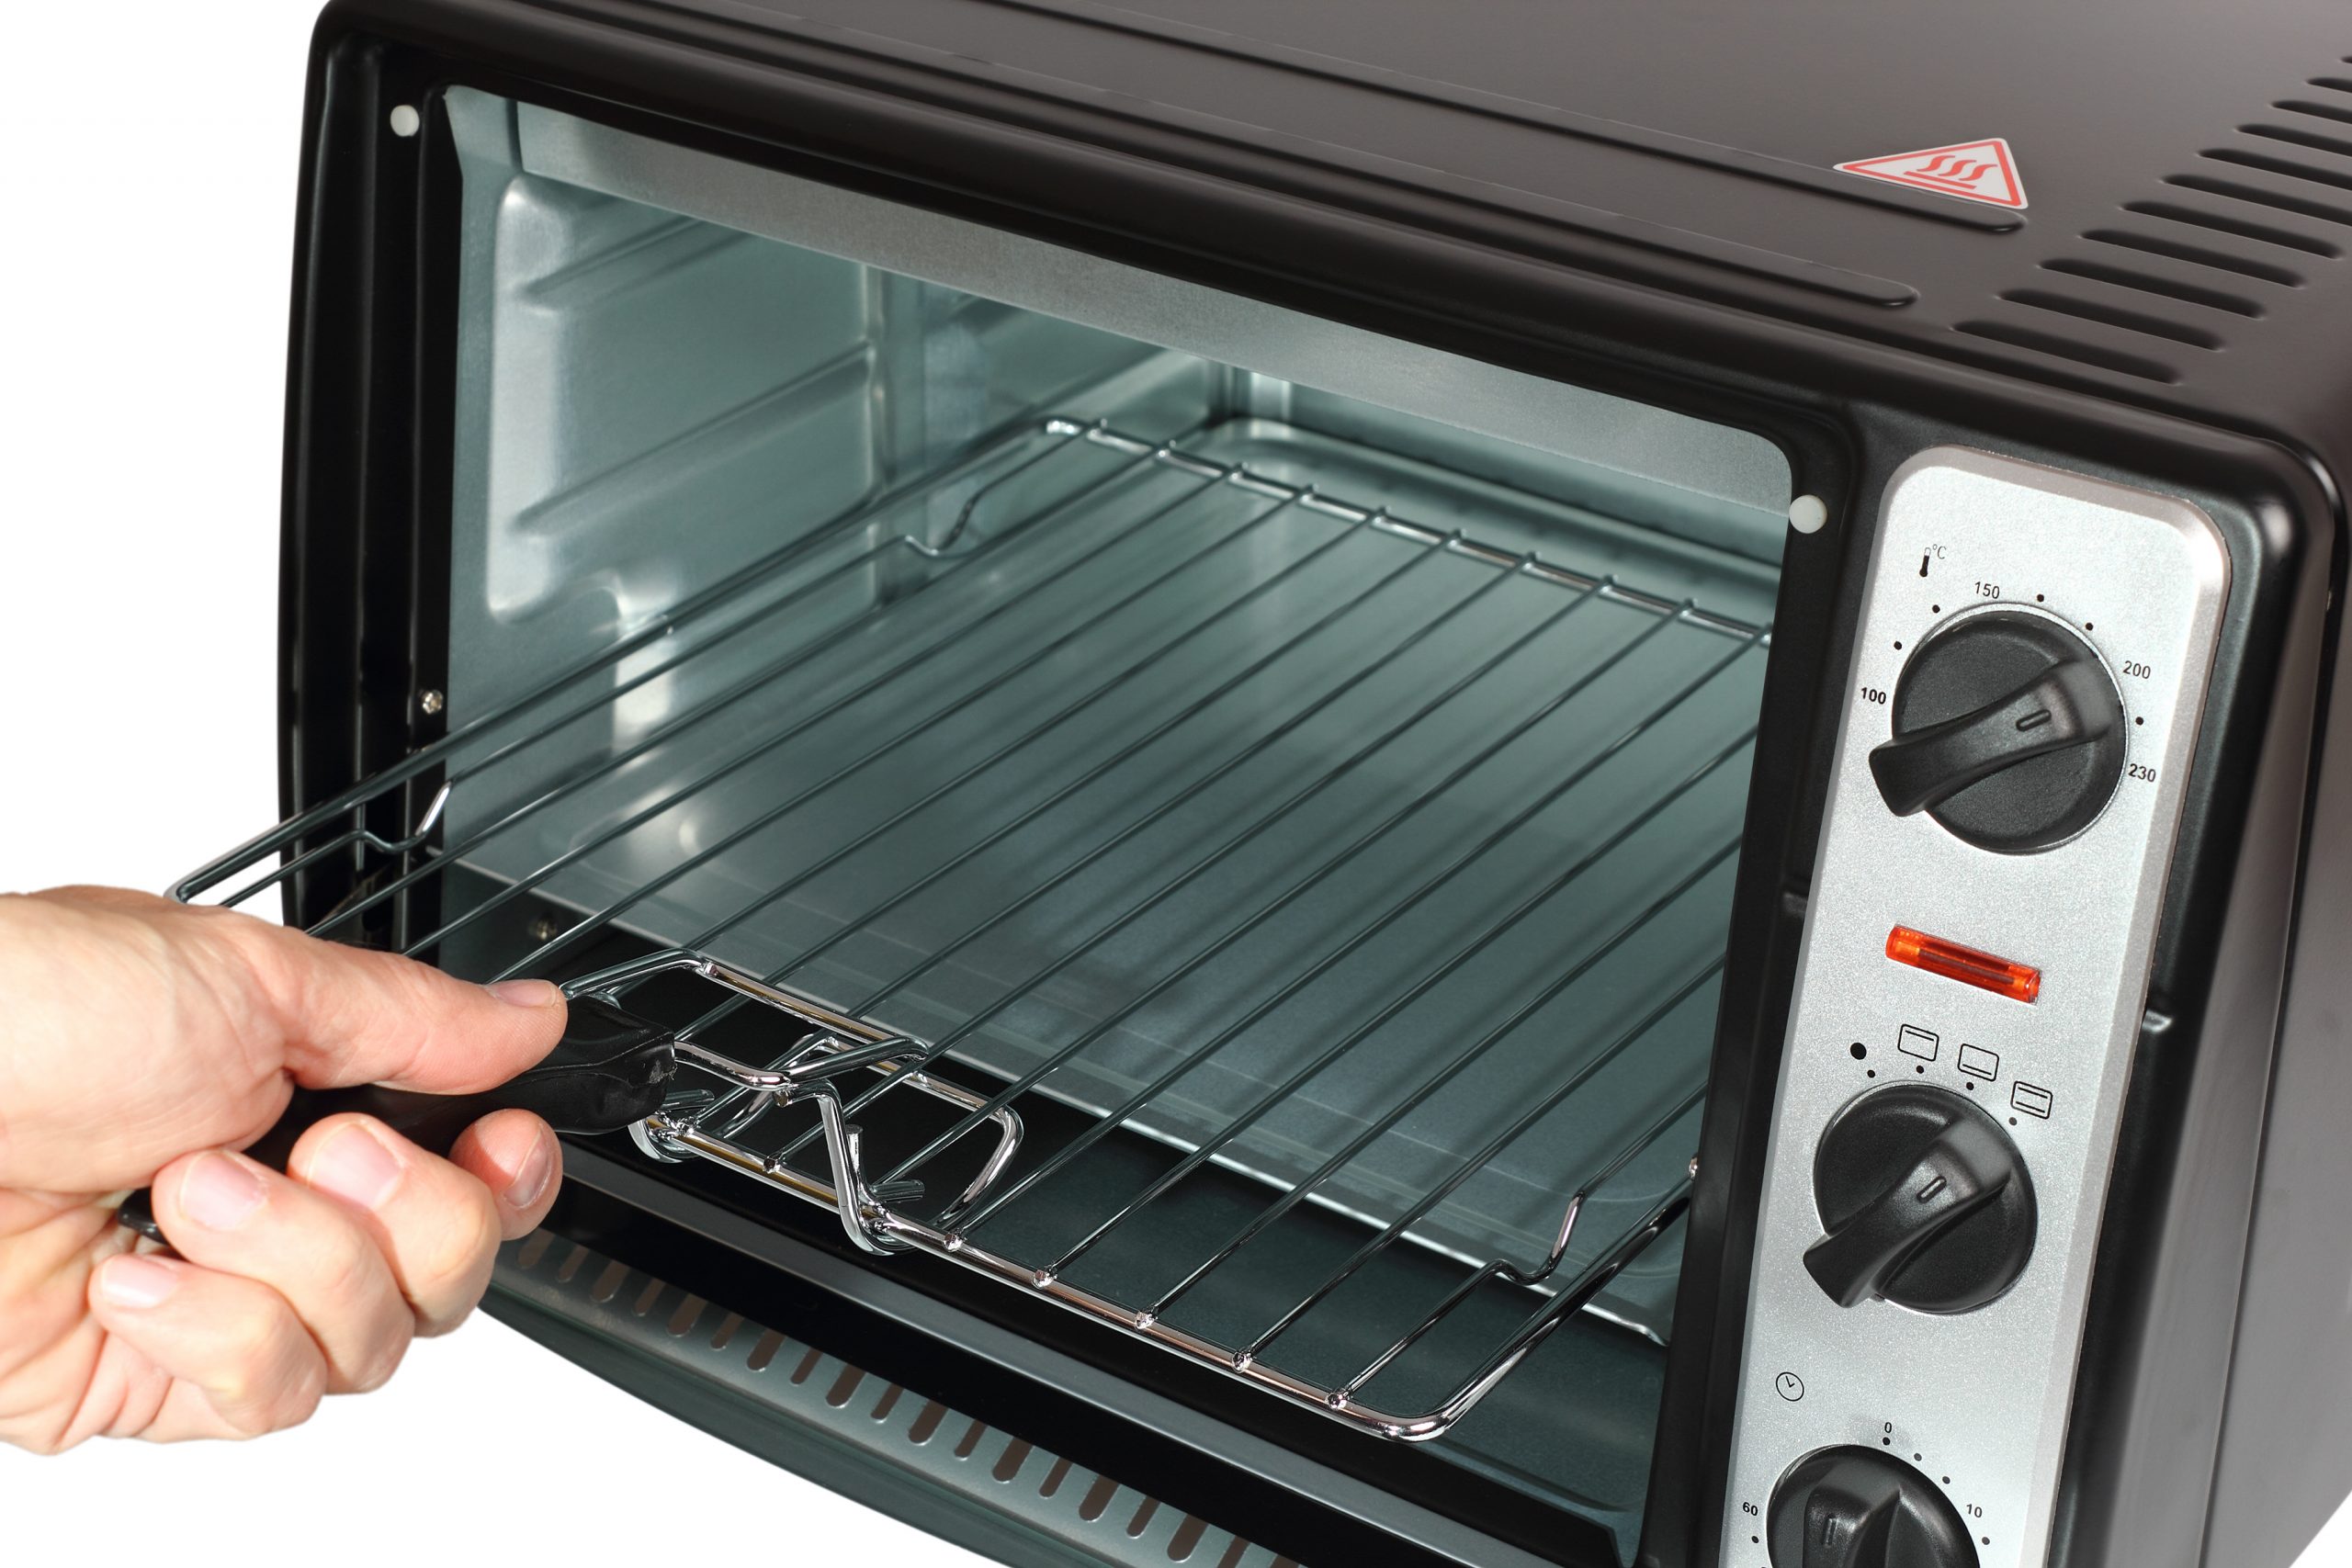 How to Clean a Toaster and Toaster Oven Properly